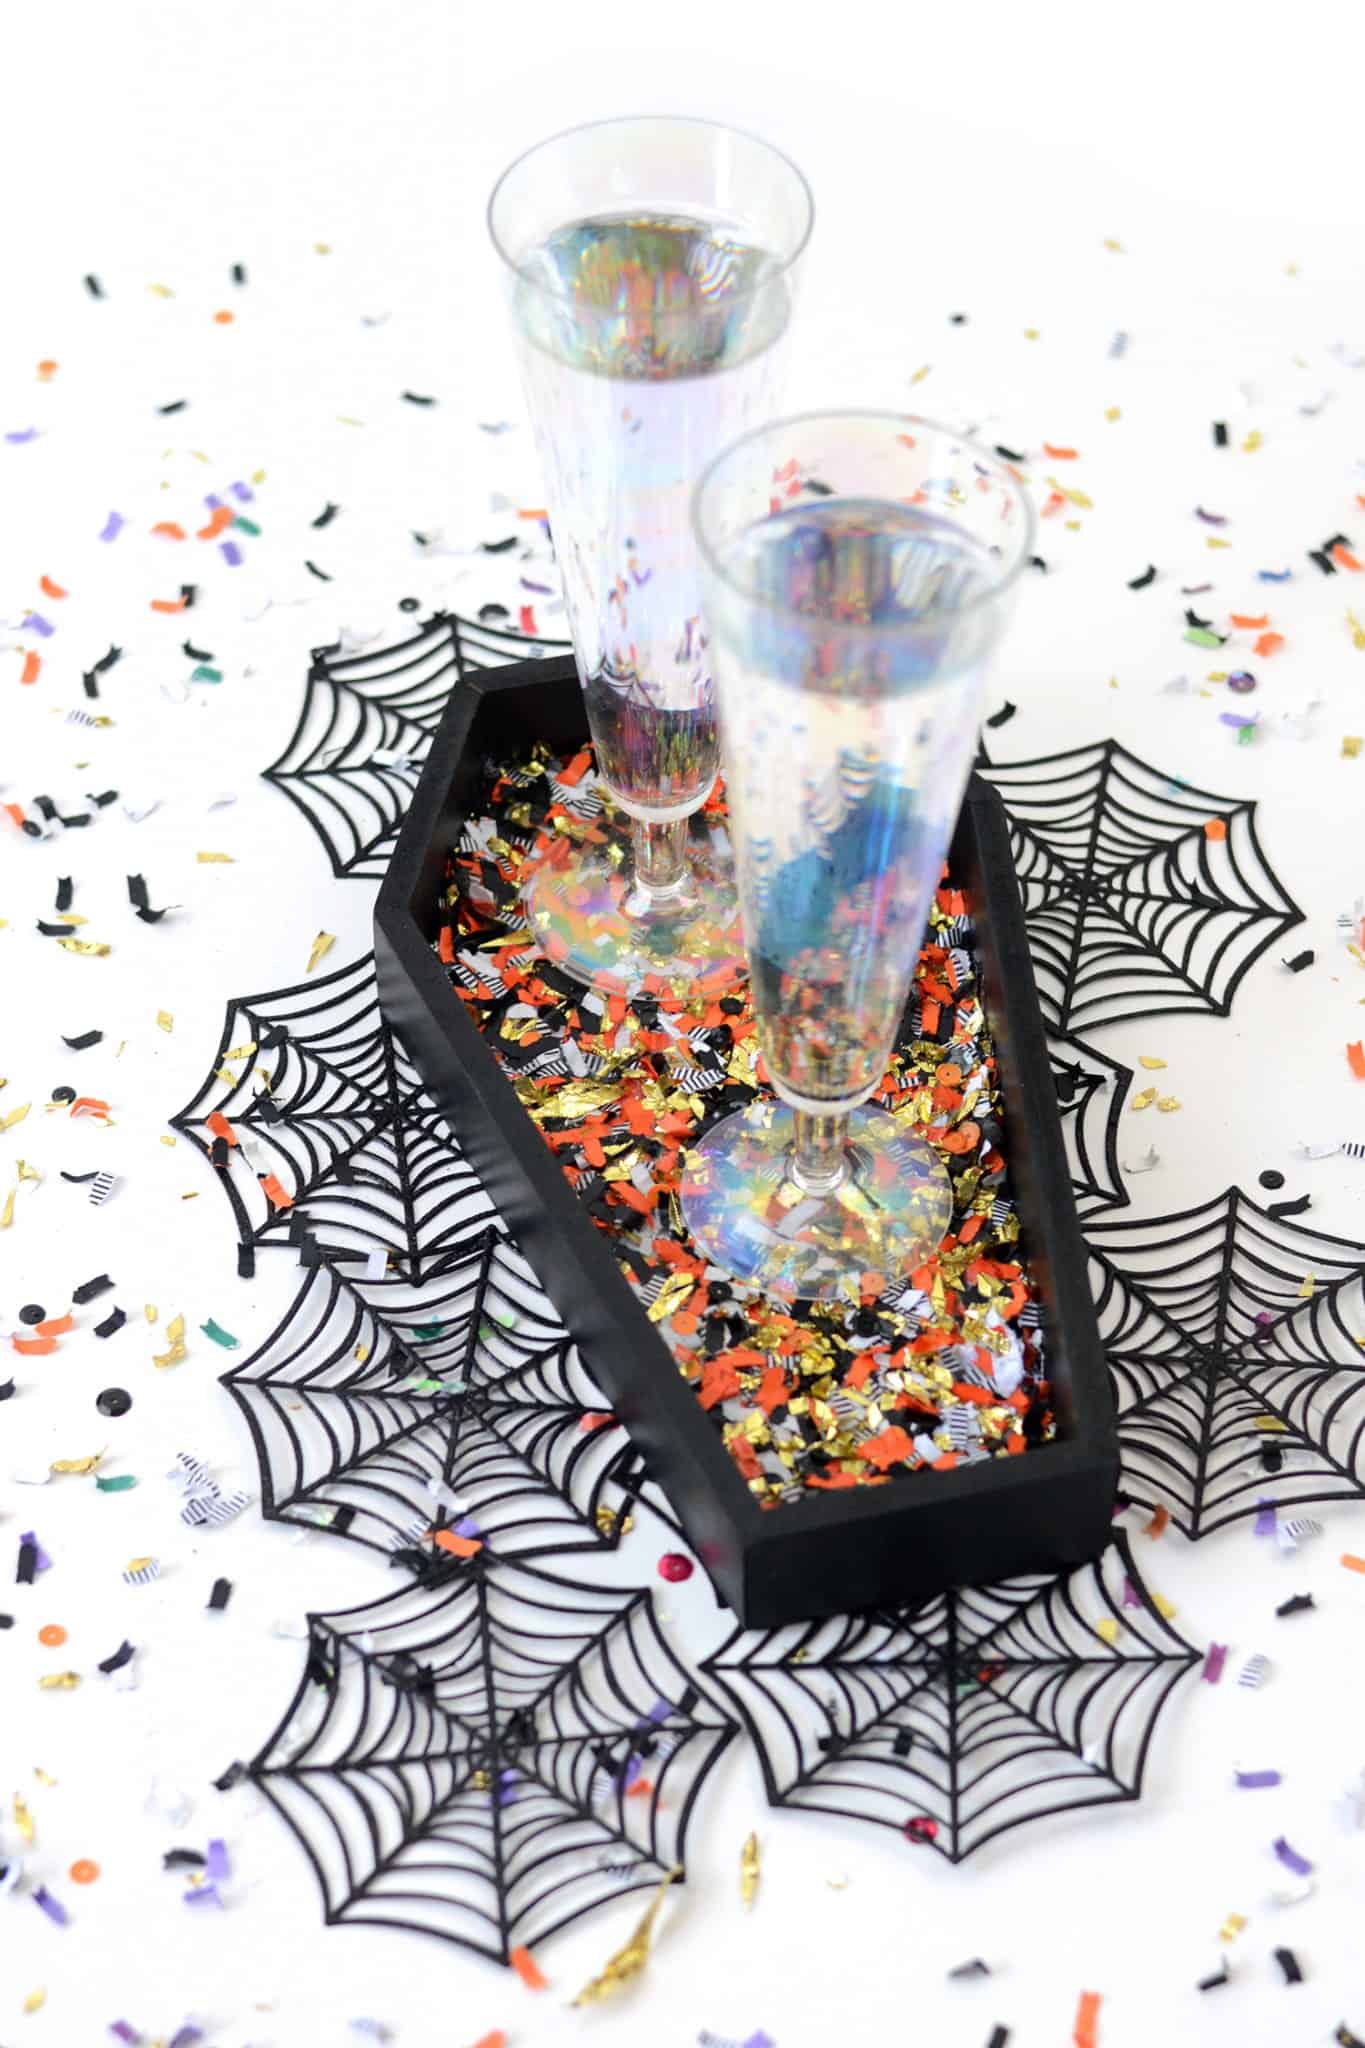 Coffin Tray for a Halloween Celebration